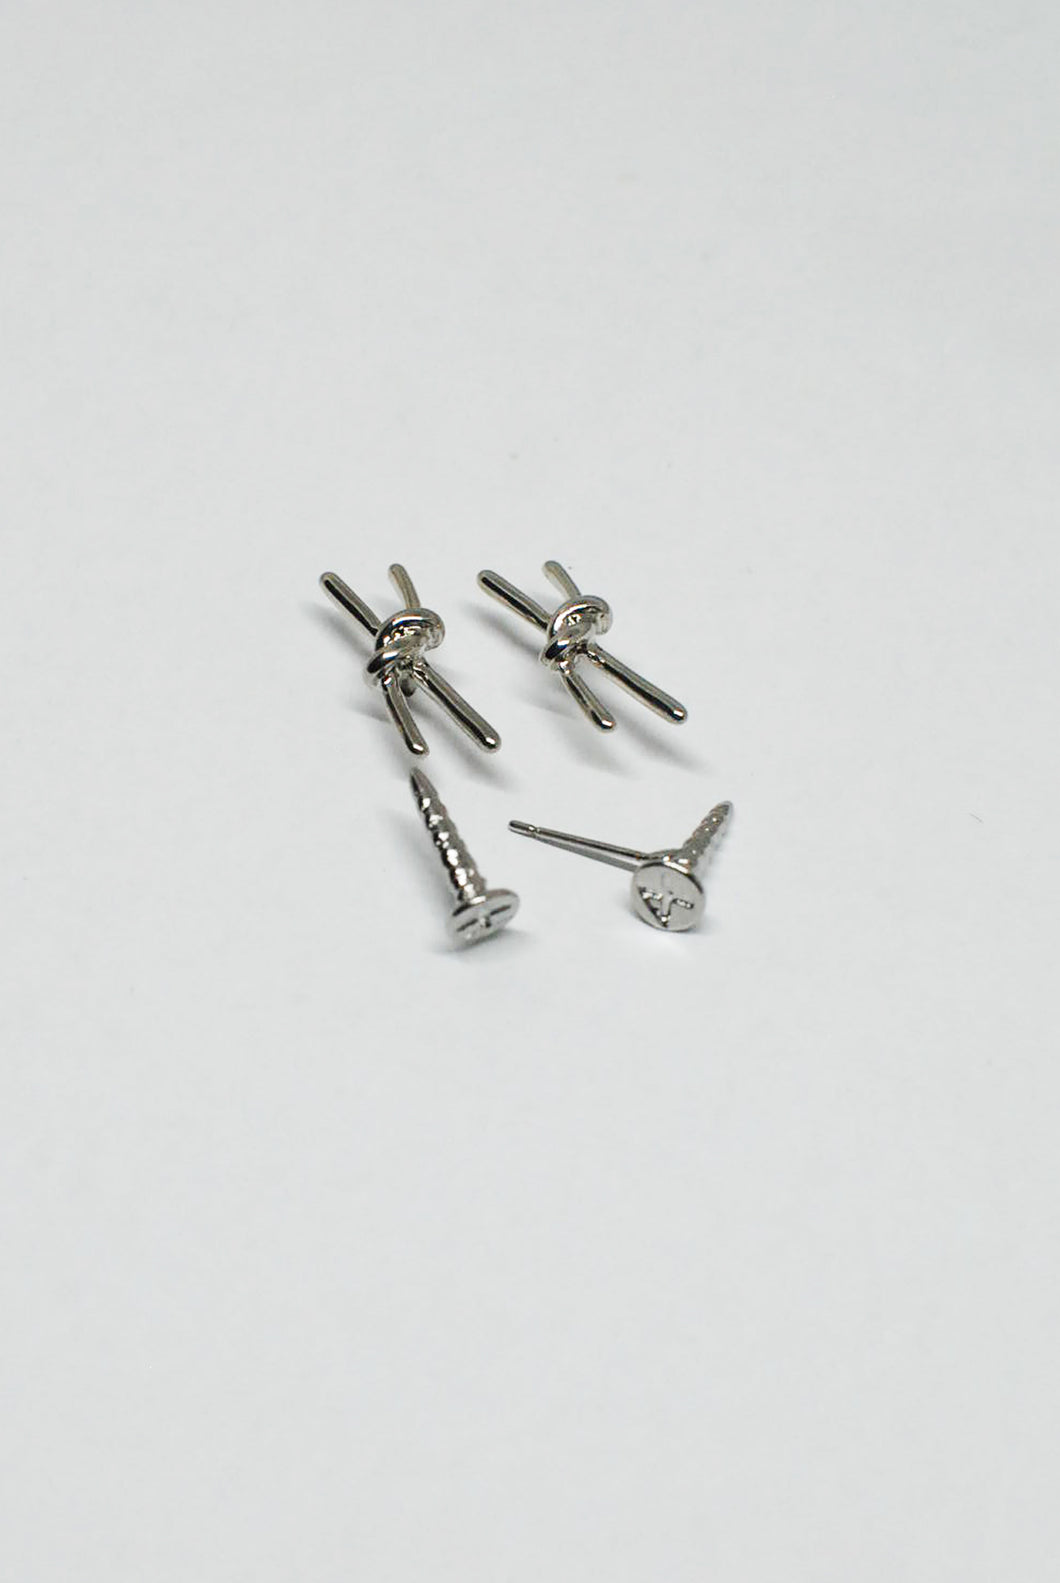 Punk Barb Wire and Screw Stud Earrings